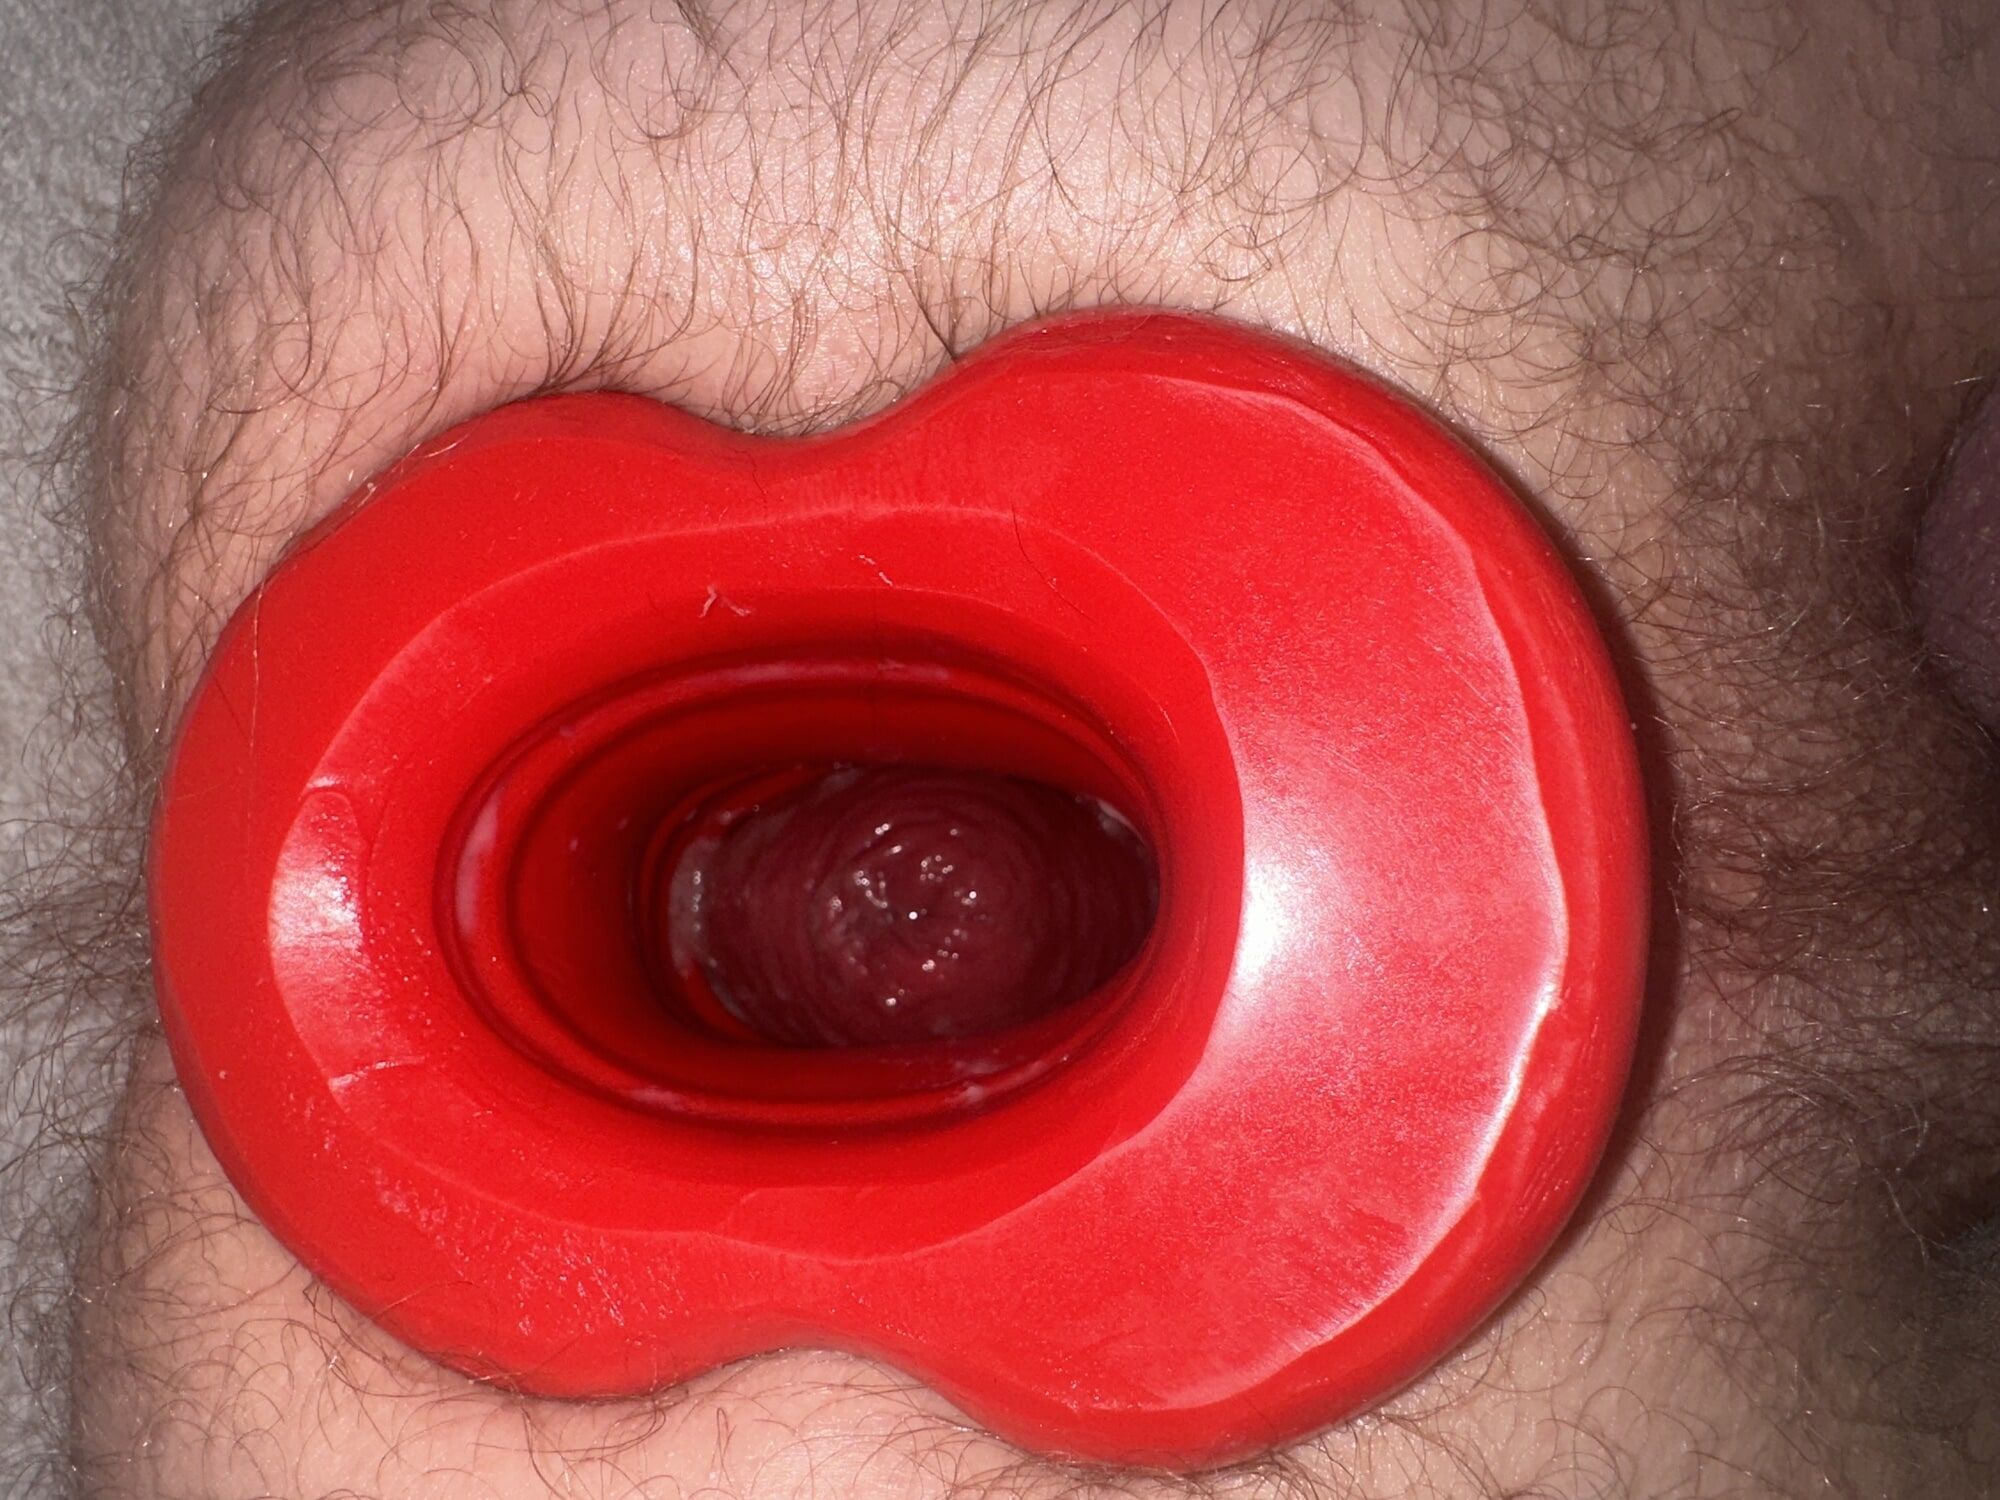 Anal prolapse in oxball ff pighole #4